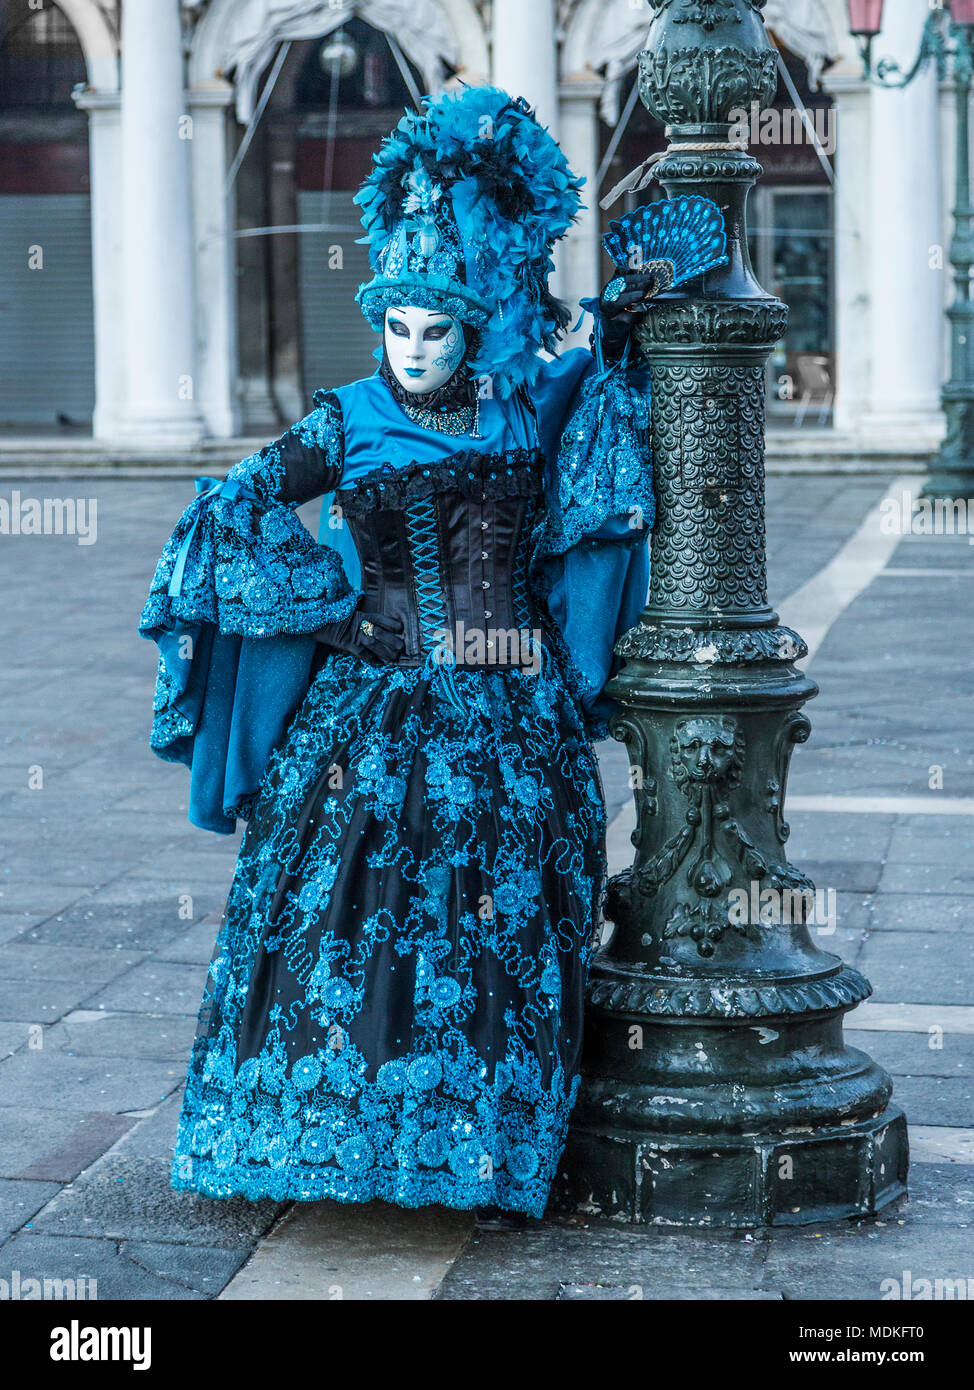 Venice Carnival, costumes, masks, masked ball, February, Piazza San Marco,  St Mark's Square Stock Photo - Alamy